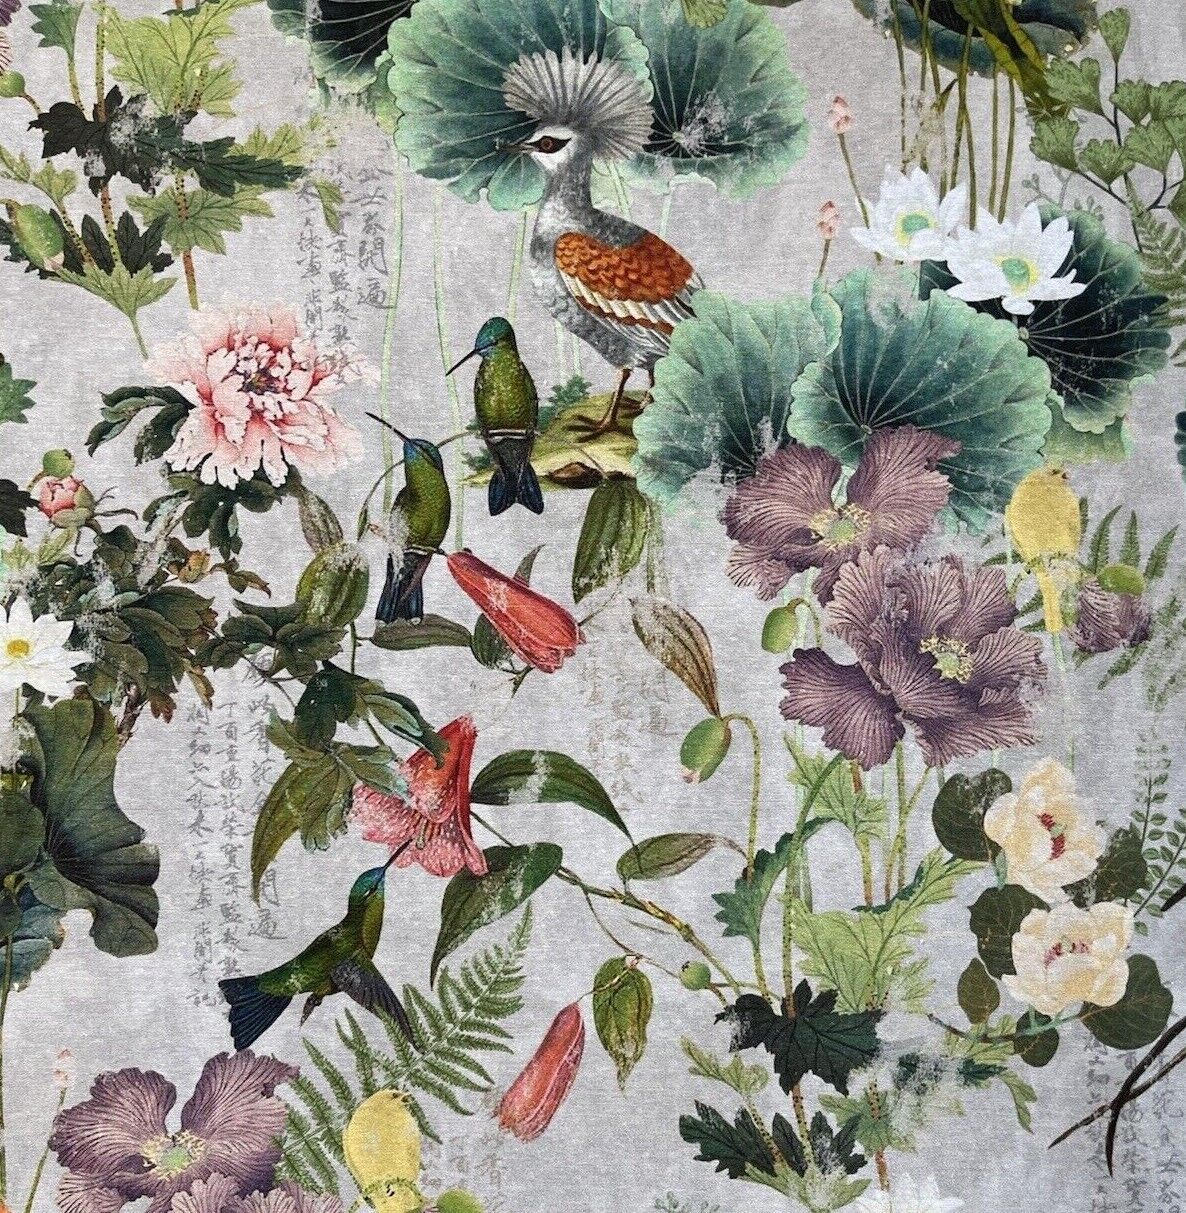 Hummingbirds Printed Cotton Fabric by Meter Paradise Birds Botanical Floral Sewing Material Vintage Grey Cottonn